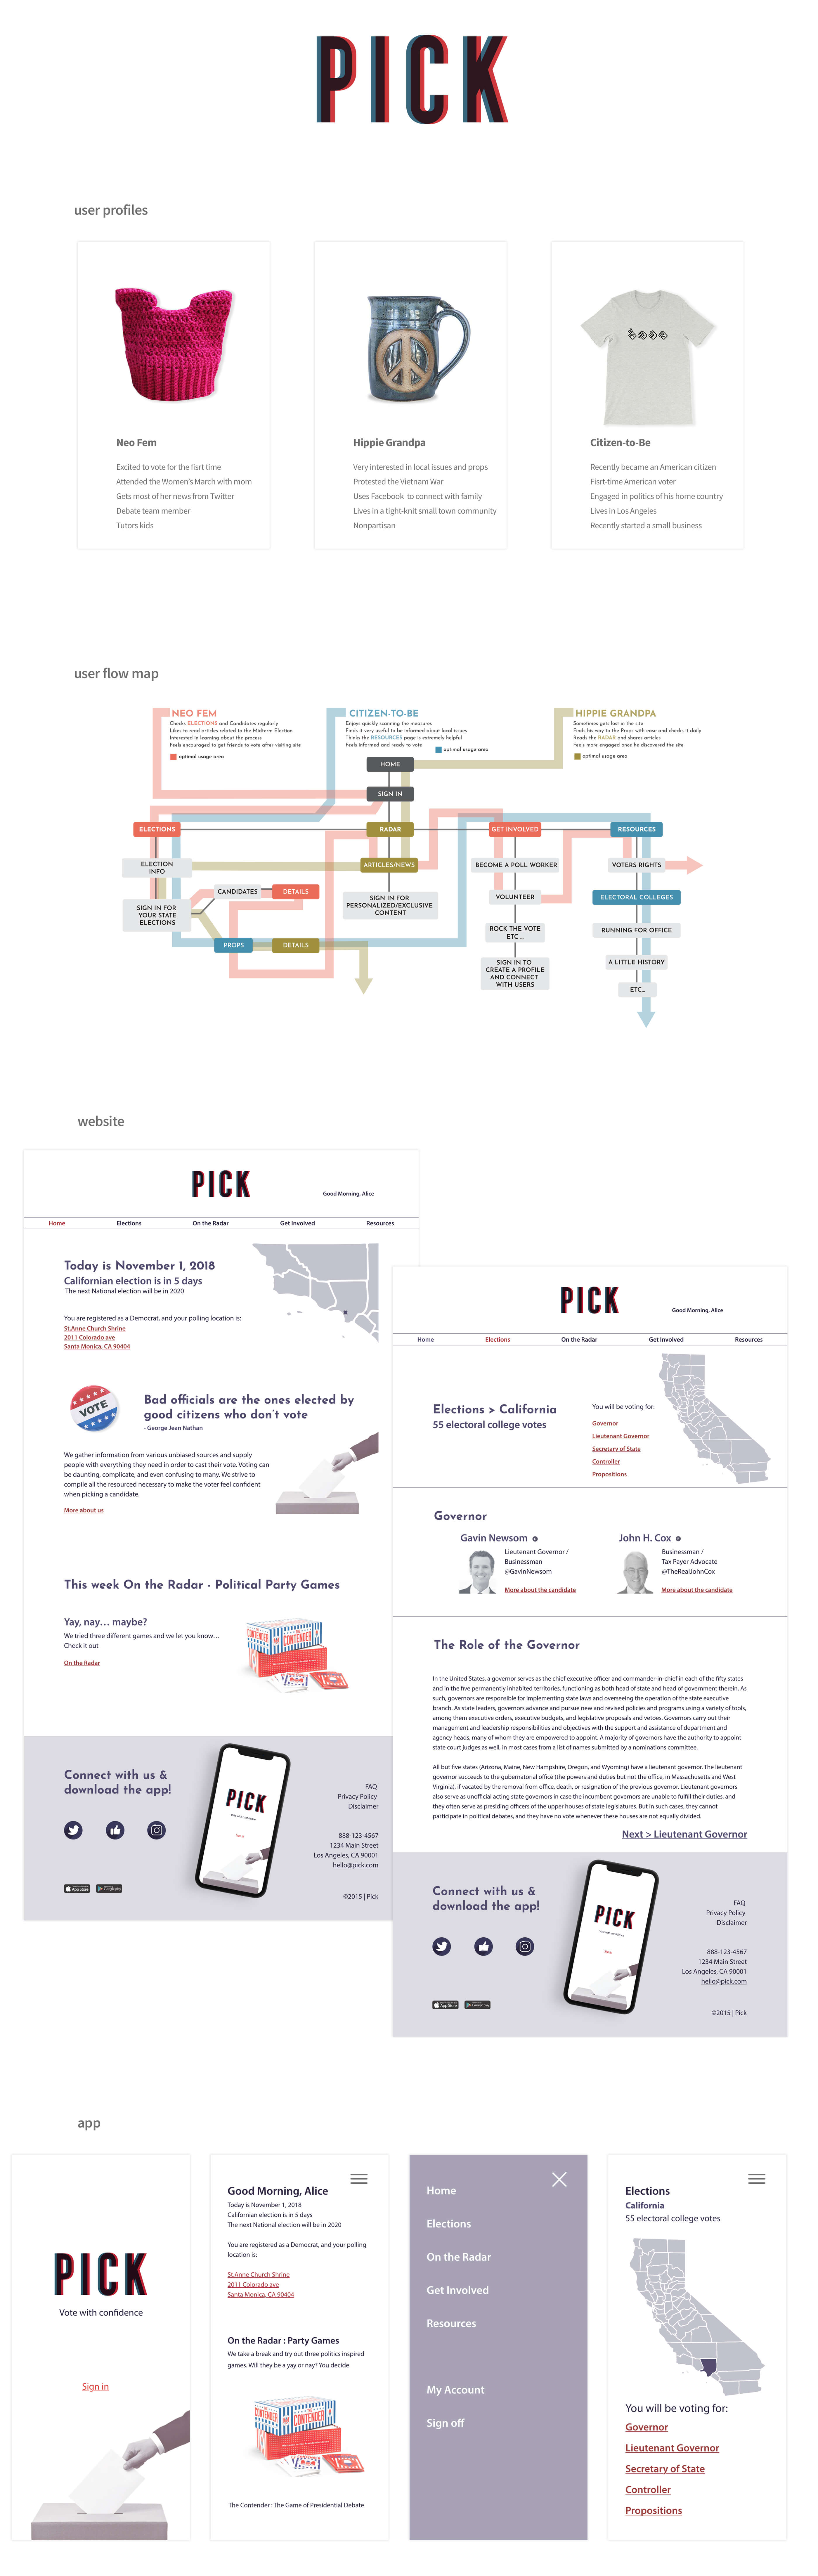 Pick voting guide visual identity student project